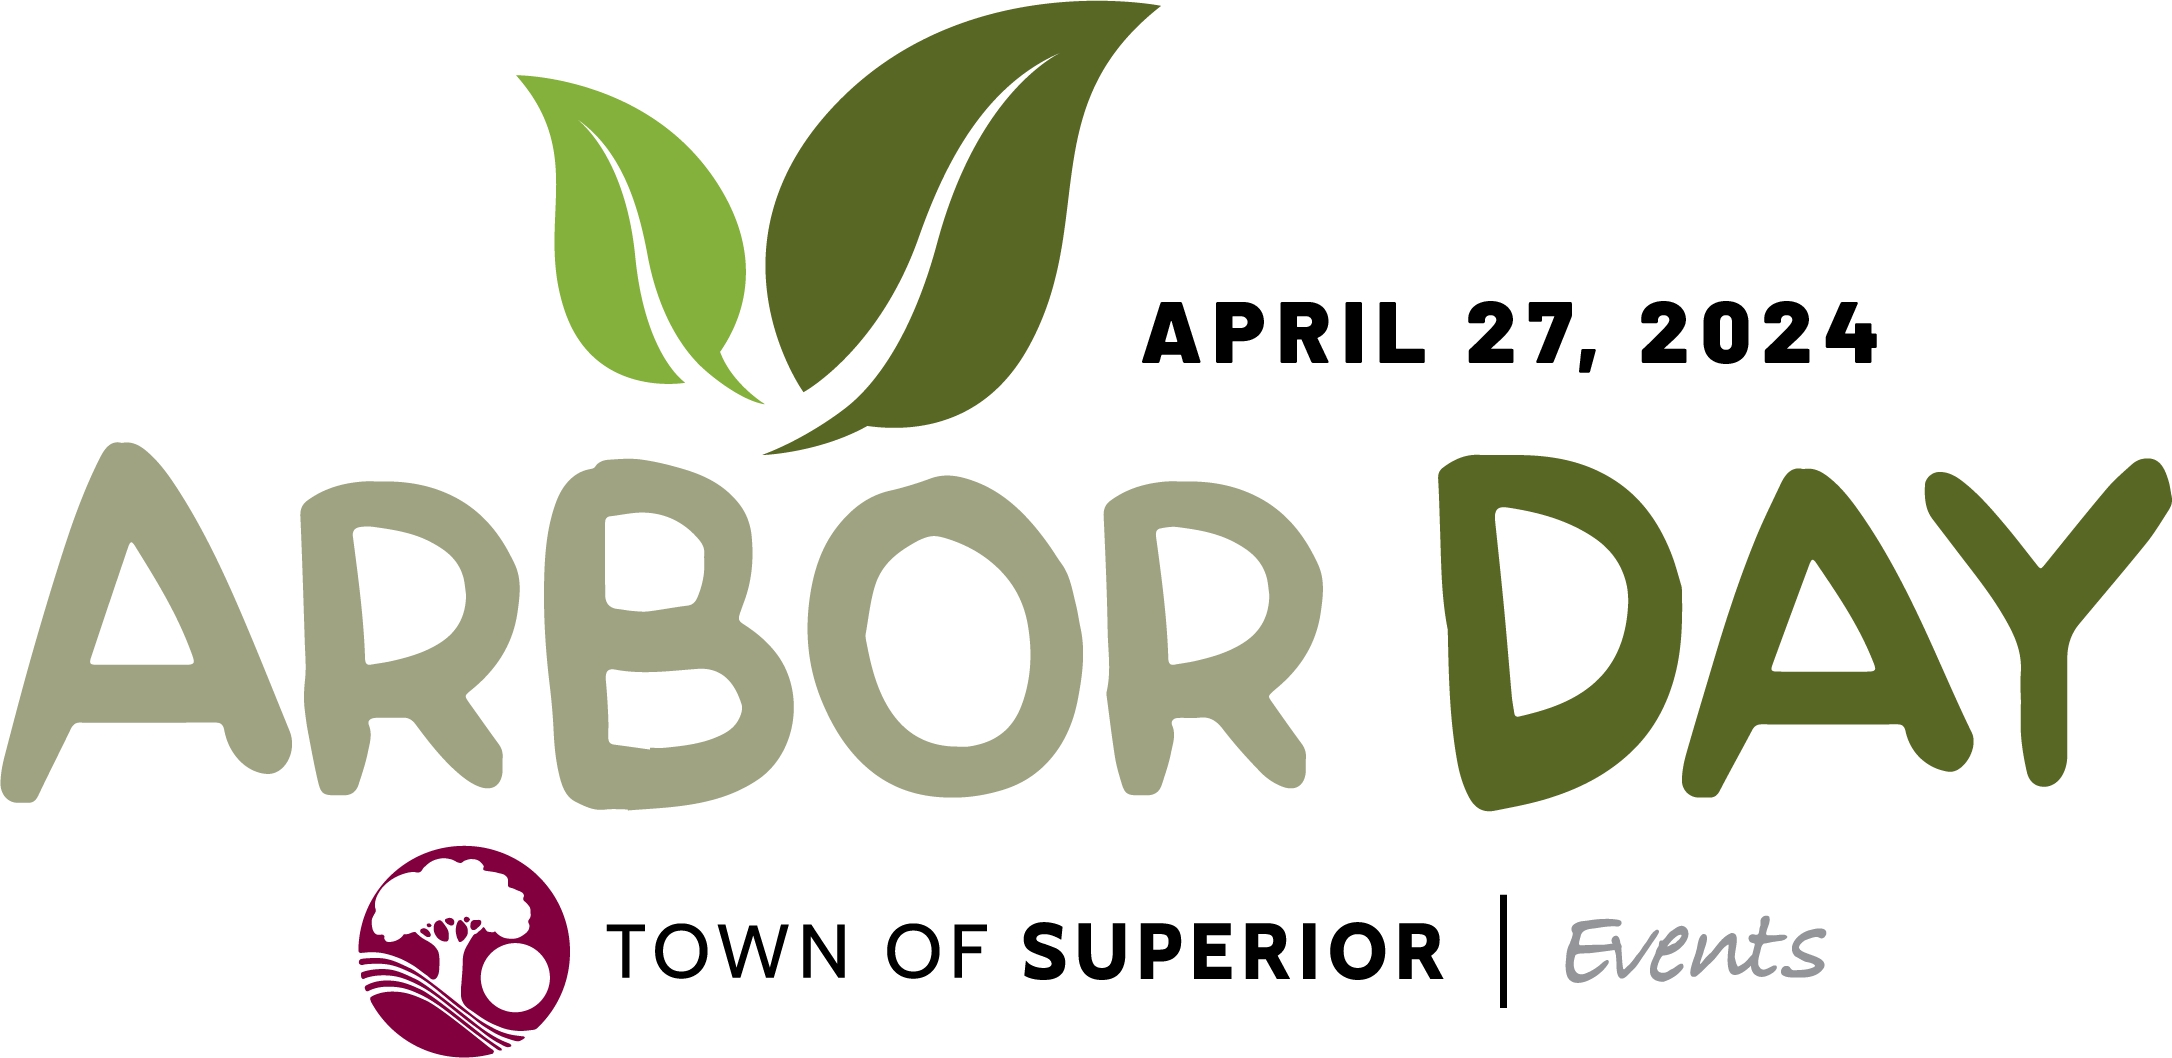 Town of Superior Arbor Day 2024 cover image